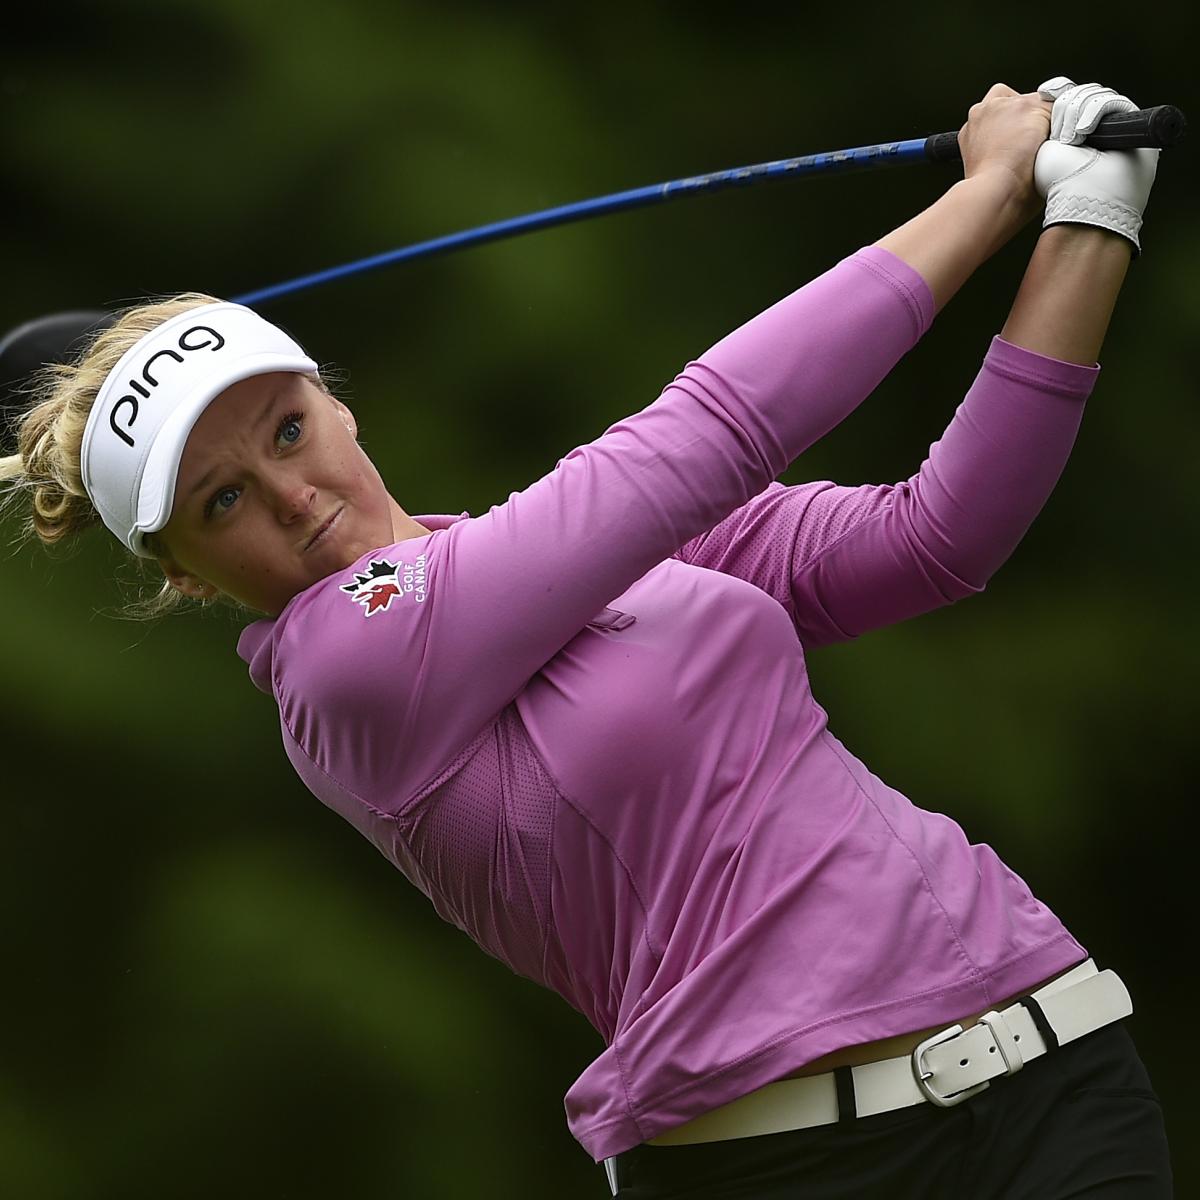 Womens Pga Championship 2016 Friday Leaderboard Scores And Highlights News Scores 